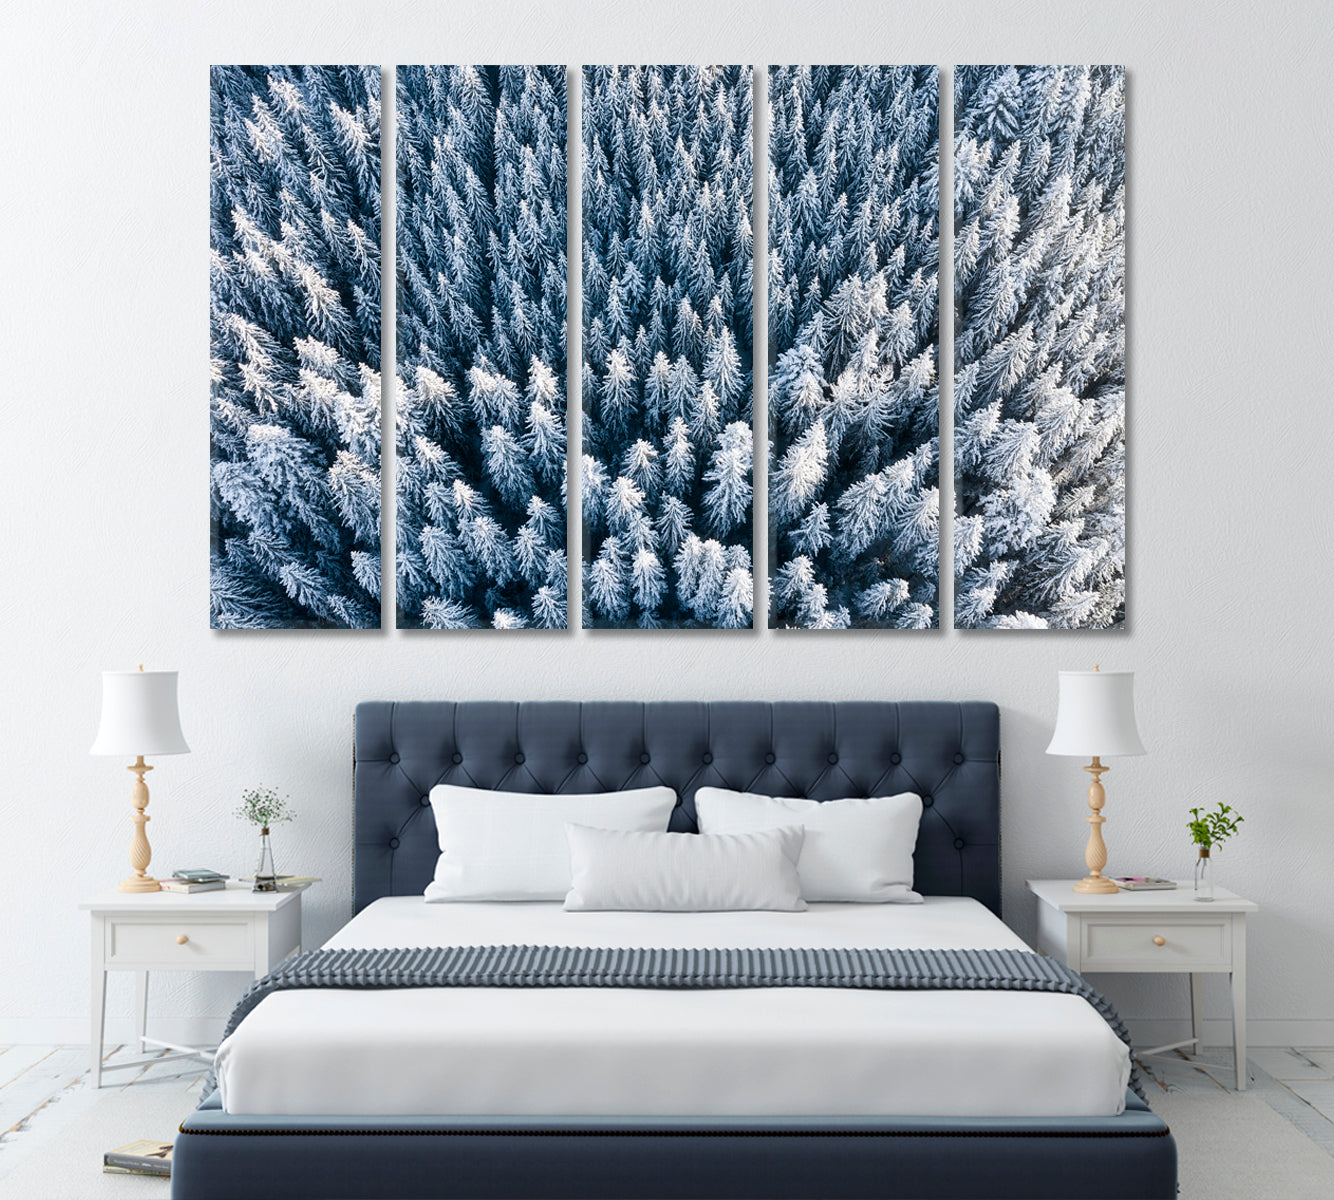 Winter Forest Canvas Print ArtLexy 5 Panels 36"x24" inches 